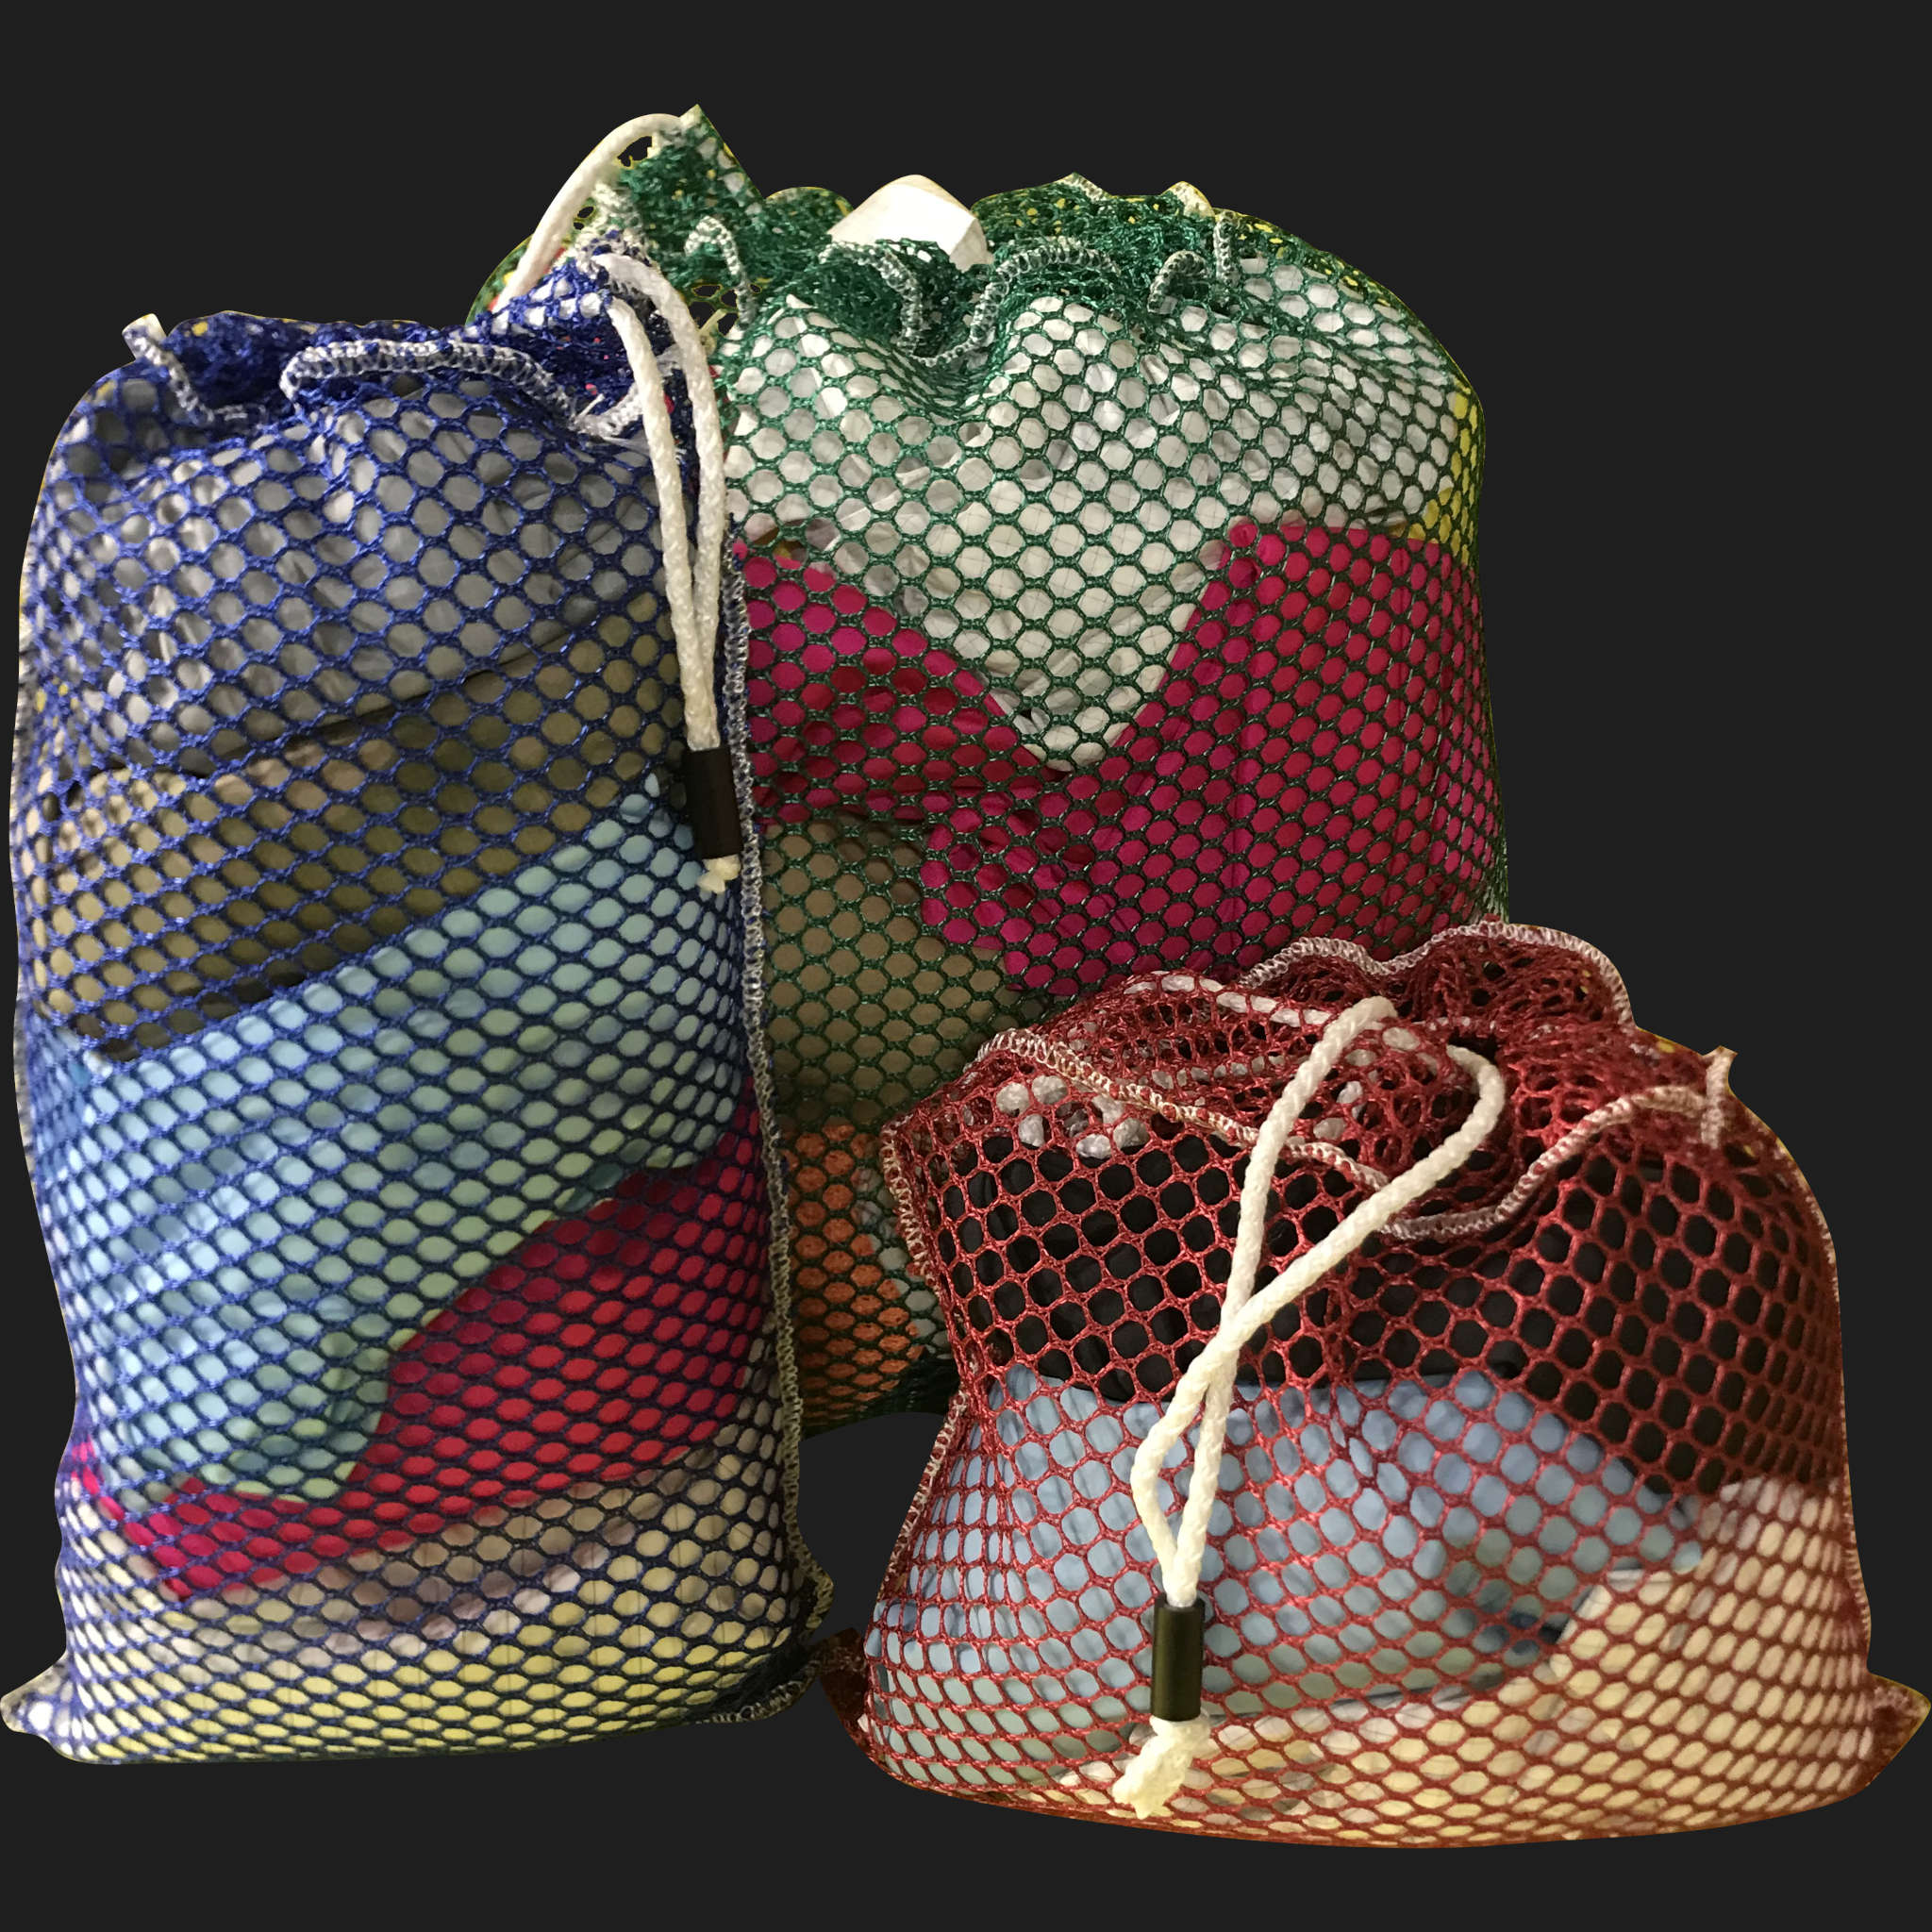 52" x 78" Customized Mesh-Net-Laundry Bags Heavy Duty with Cord and barrellock closure